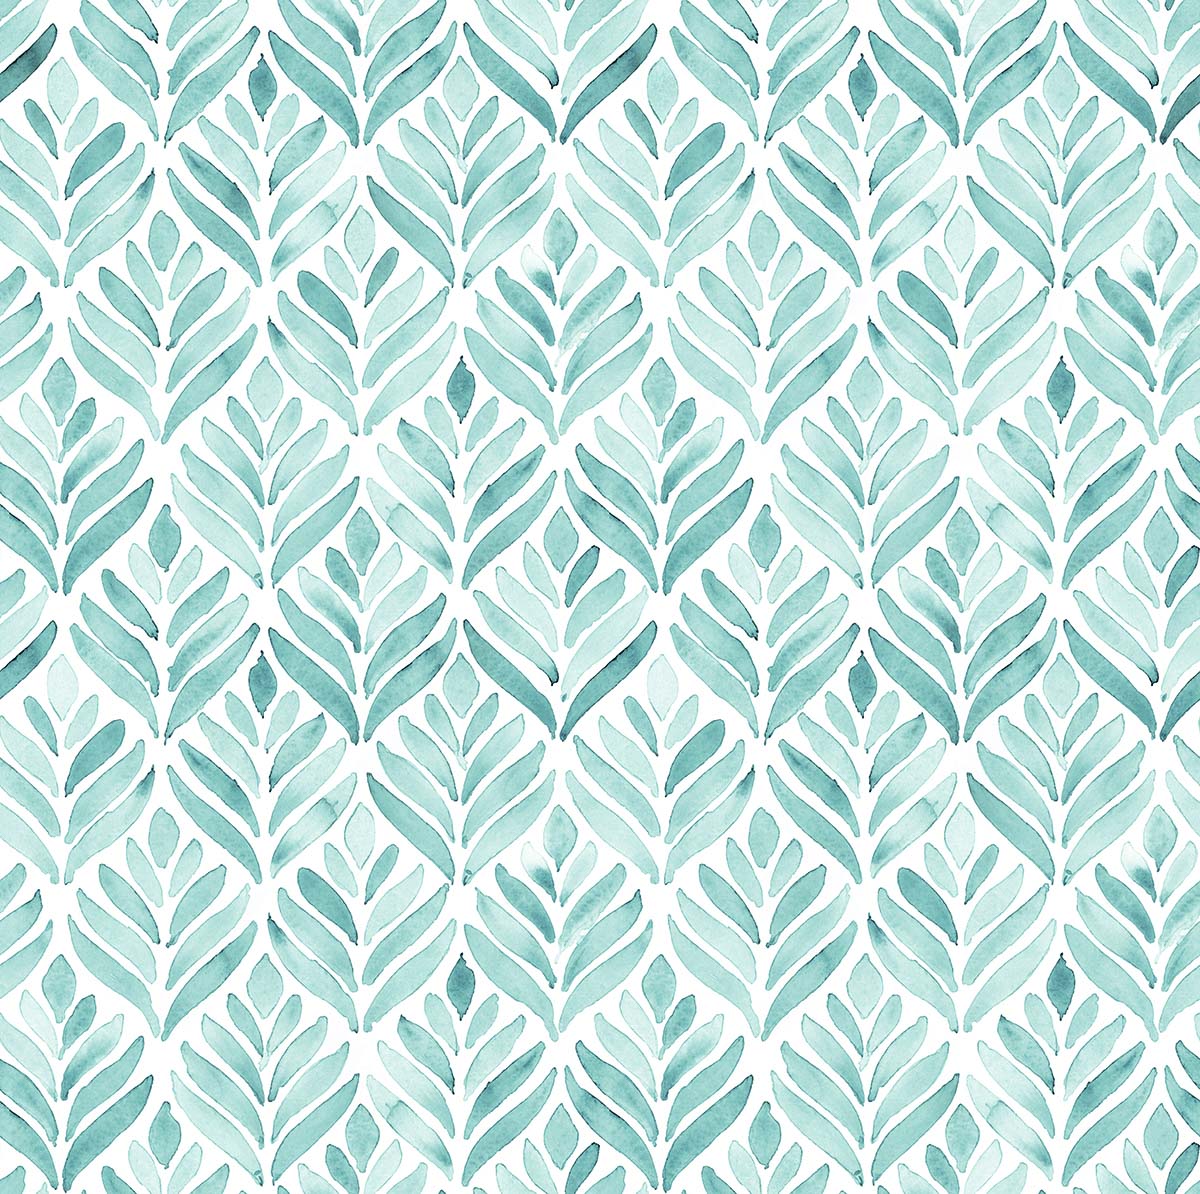 A pattern of leaves on a white background